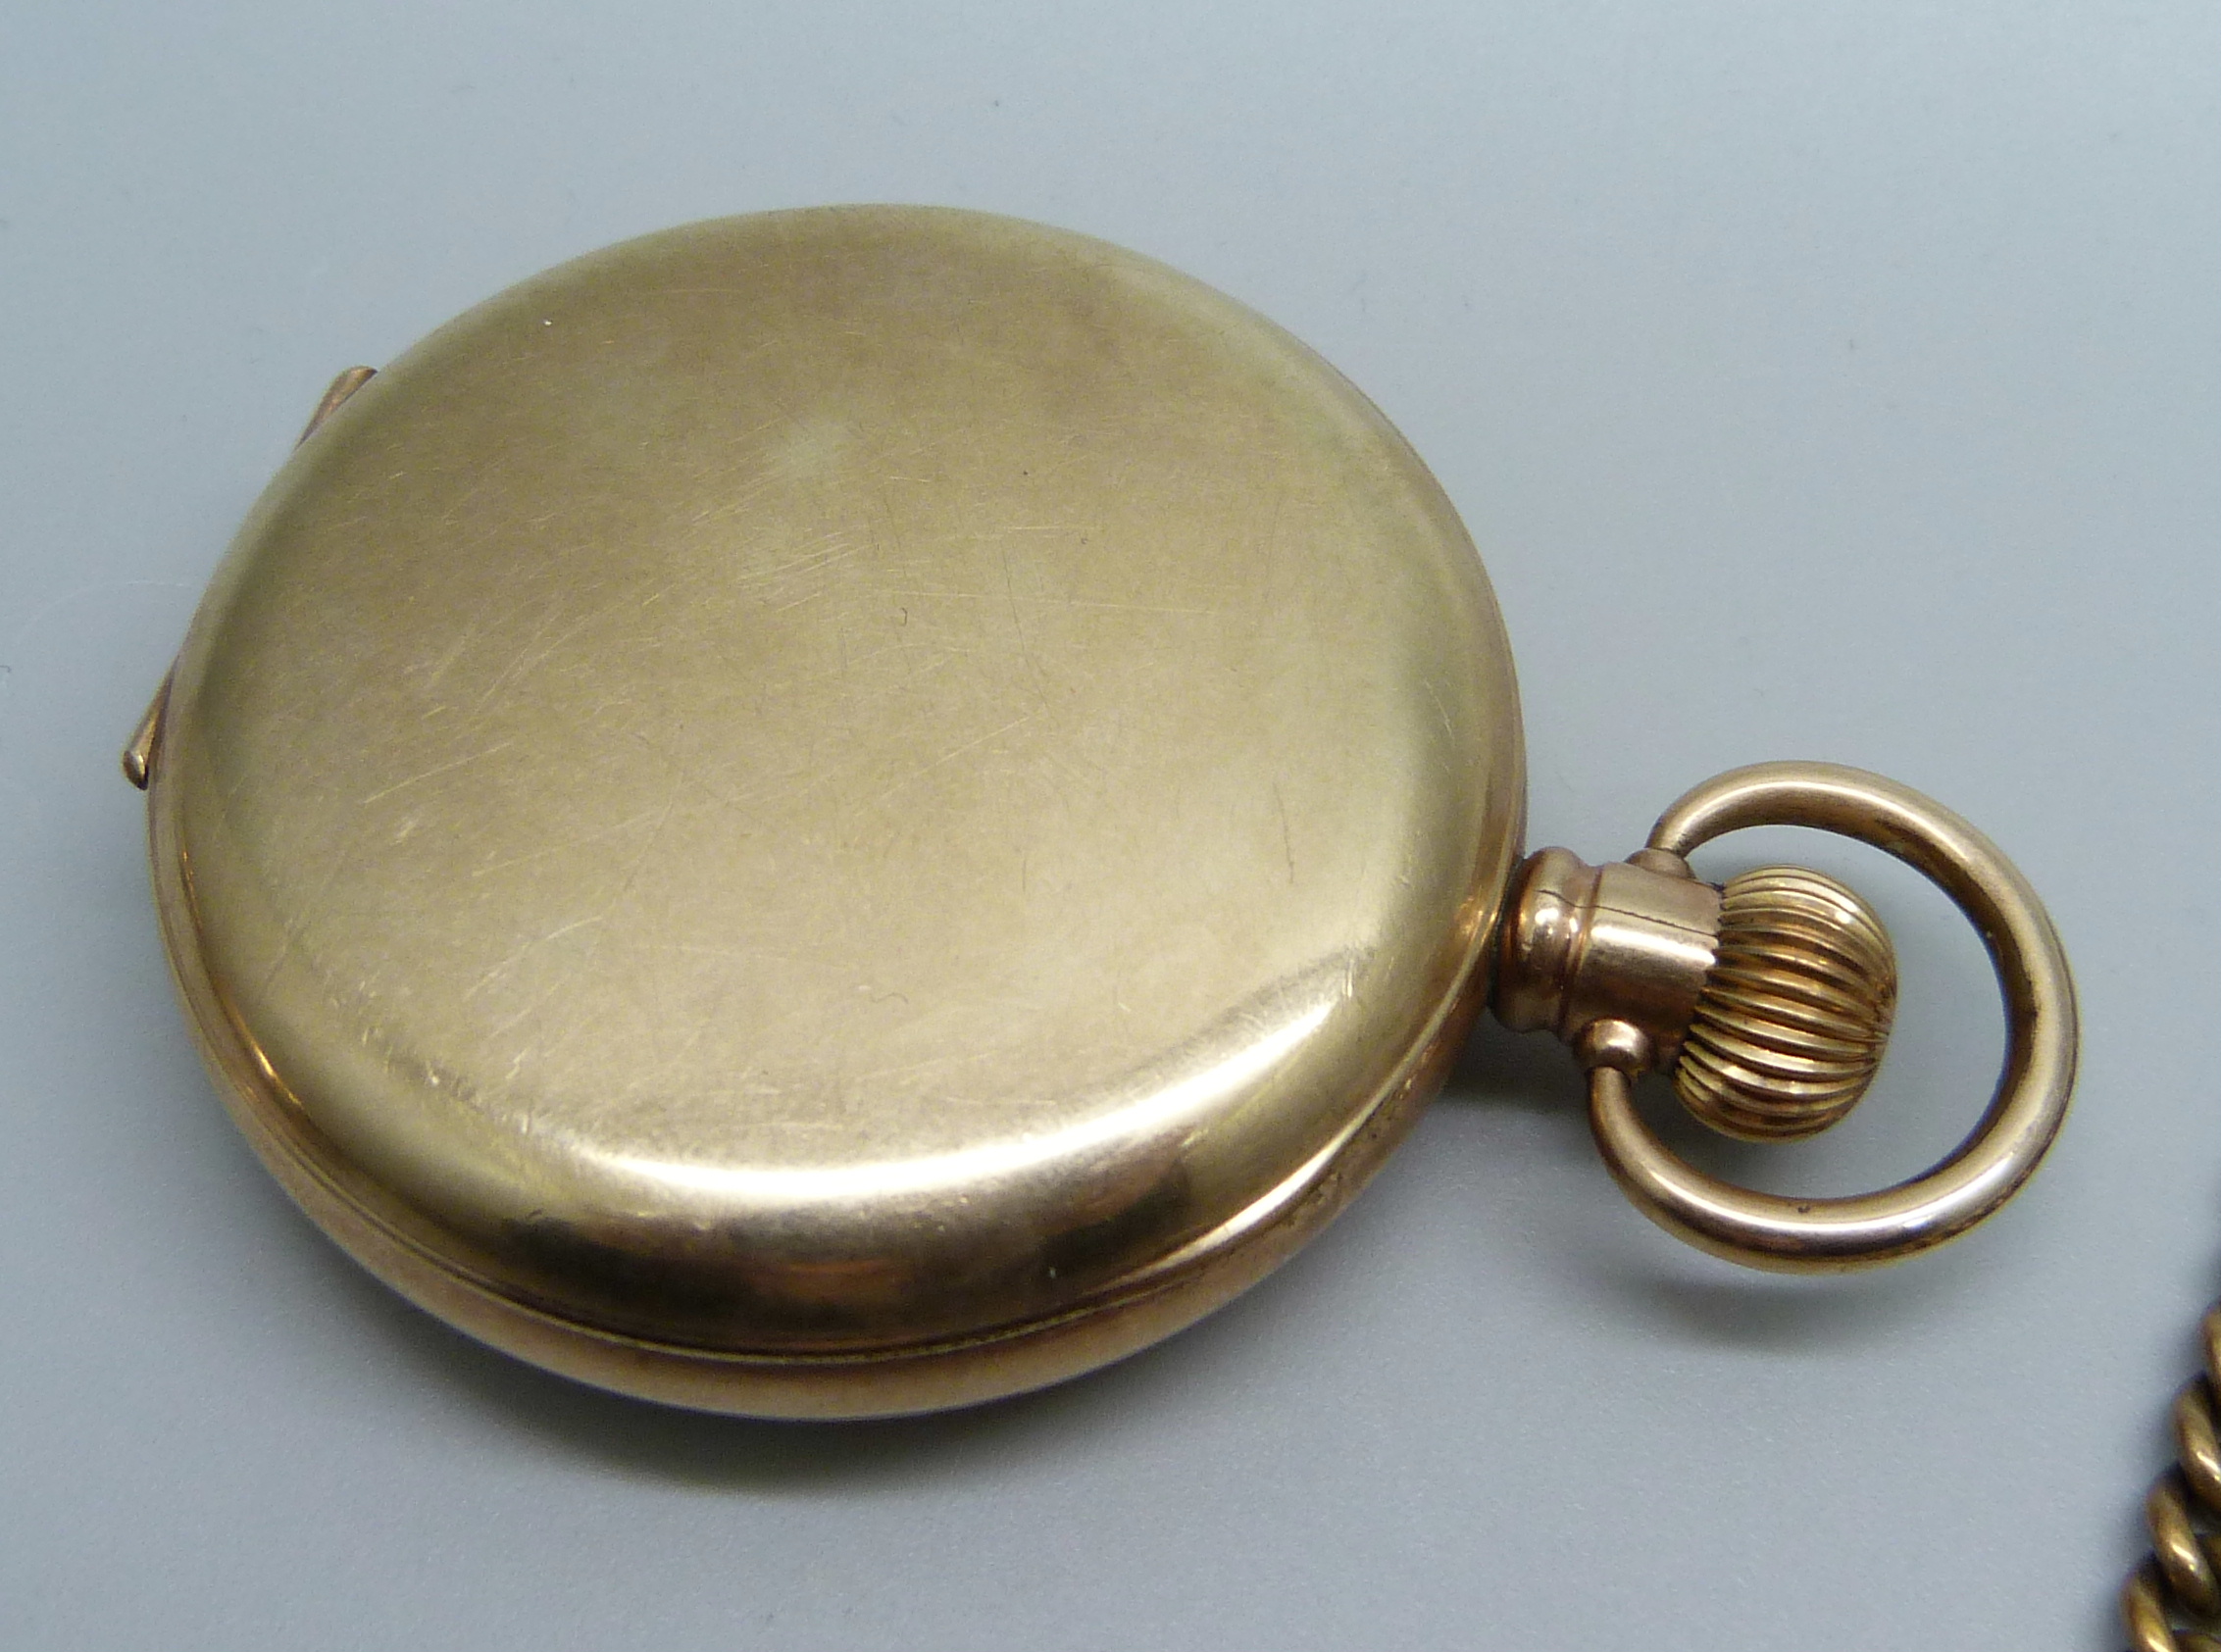 Two Waltham gold plated pocket watches both with 10 Year Star cases including a full hunter with - Image 5 of 6